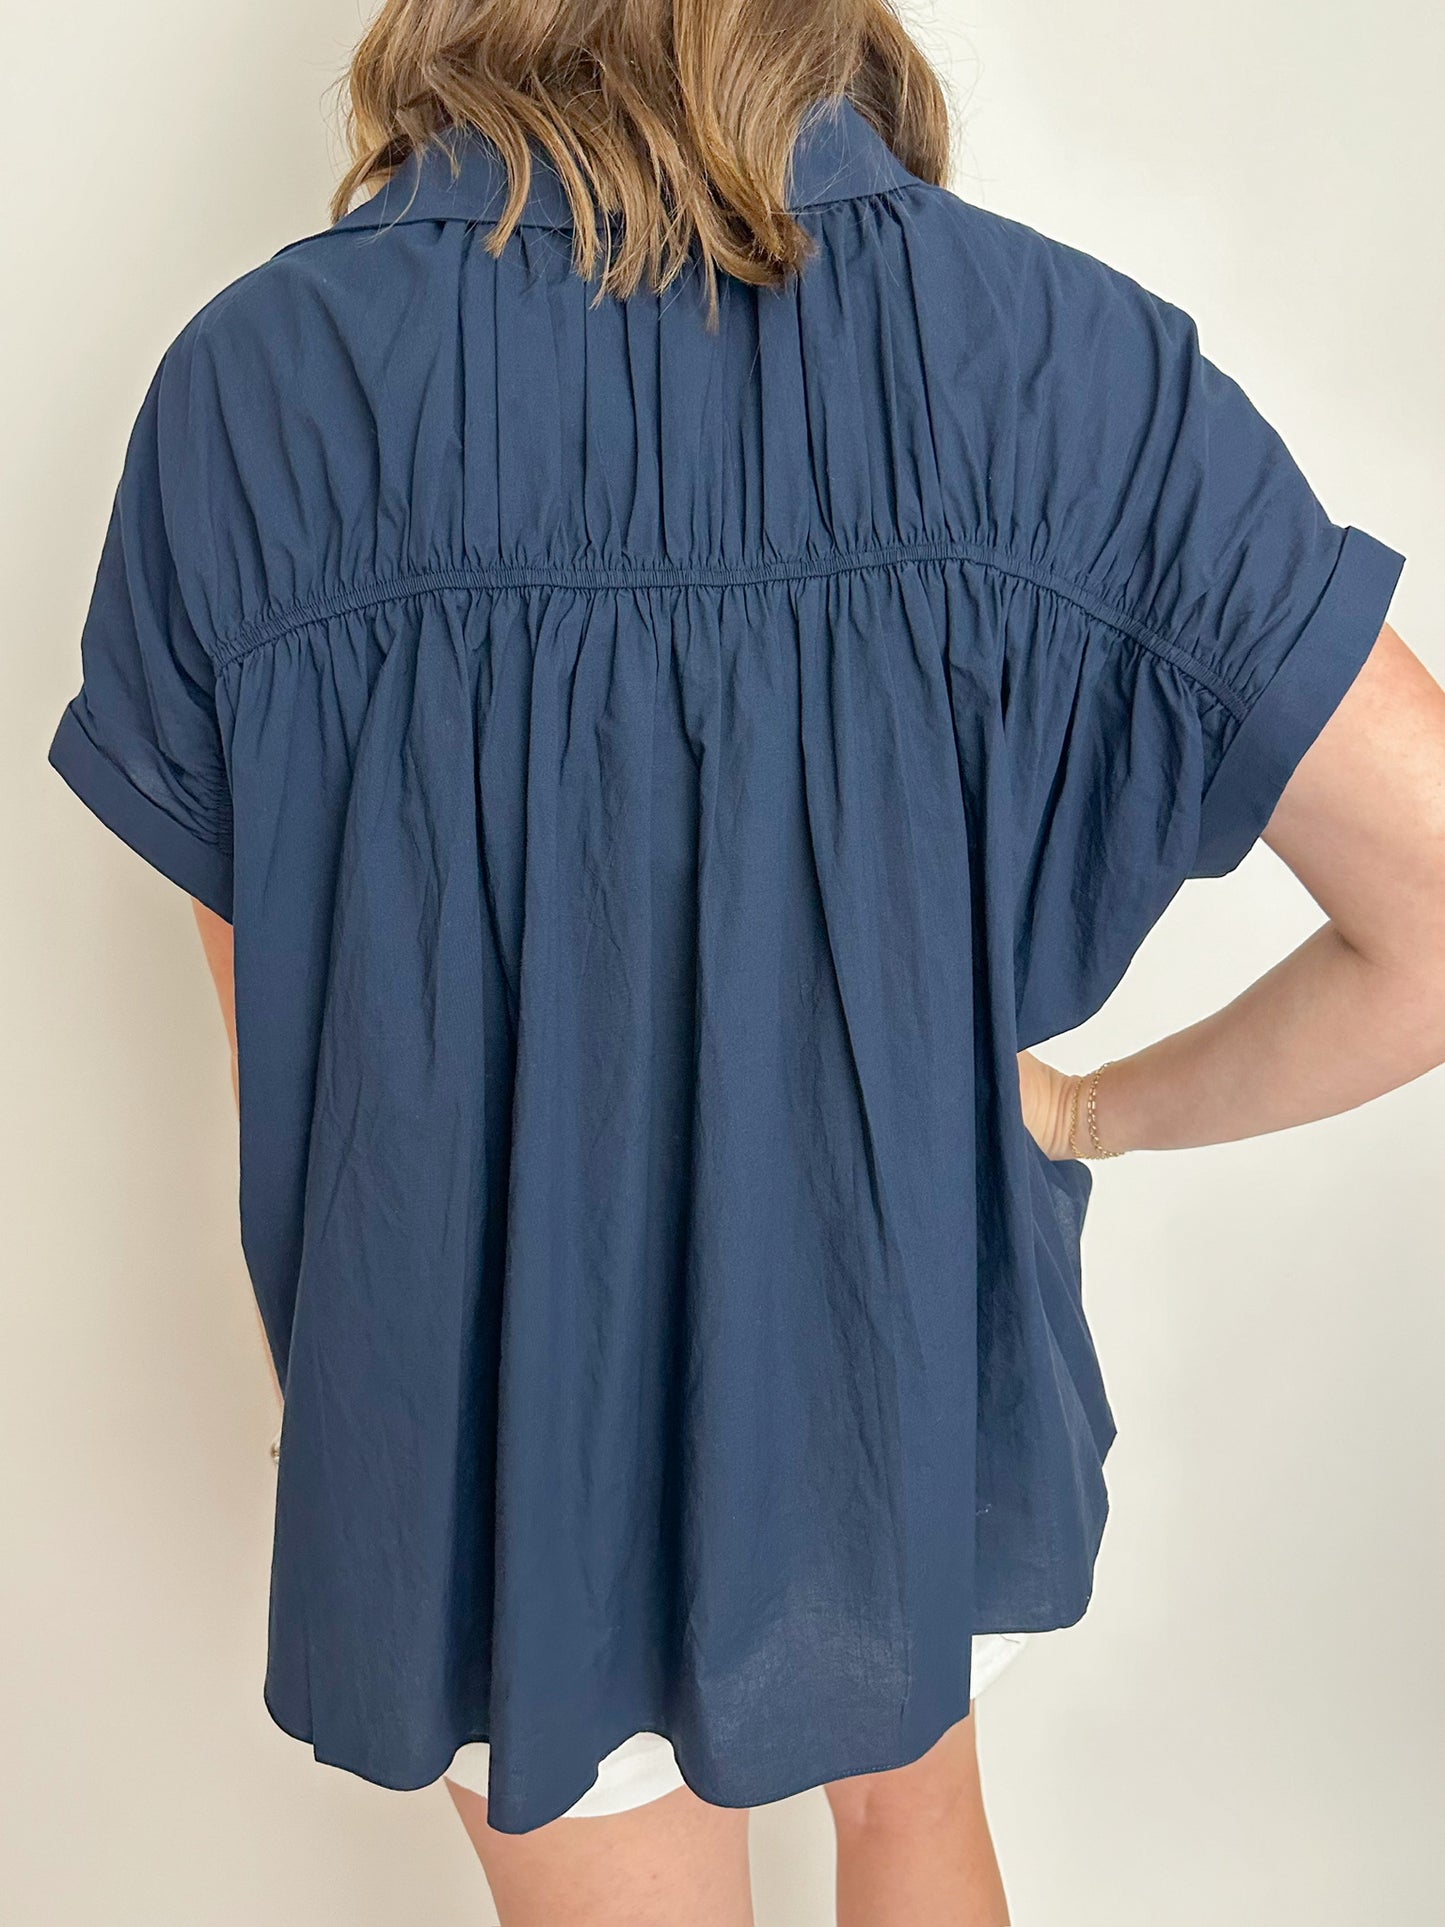 Constance Pleat Back Button Up Top